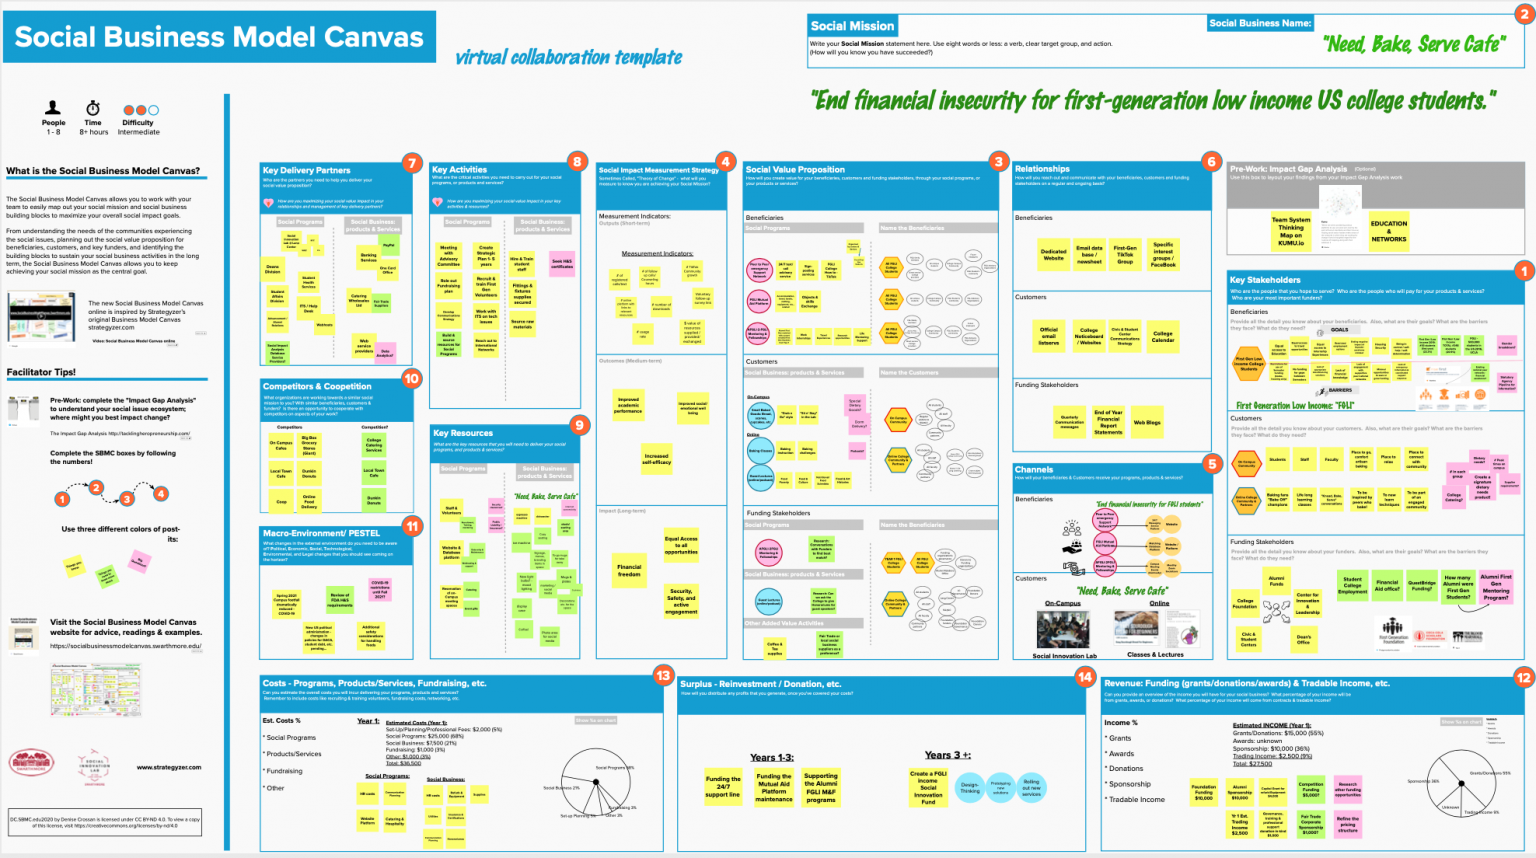 Social Business Model Canvas A Digital Collaborative Template That Helps You Plan For Social 0747